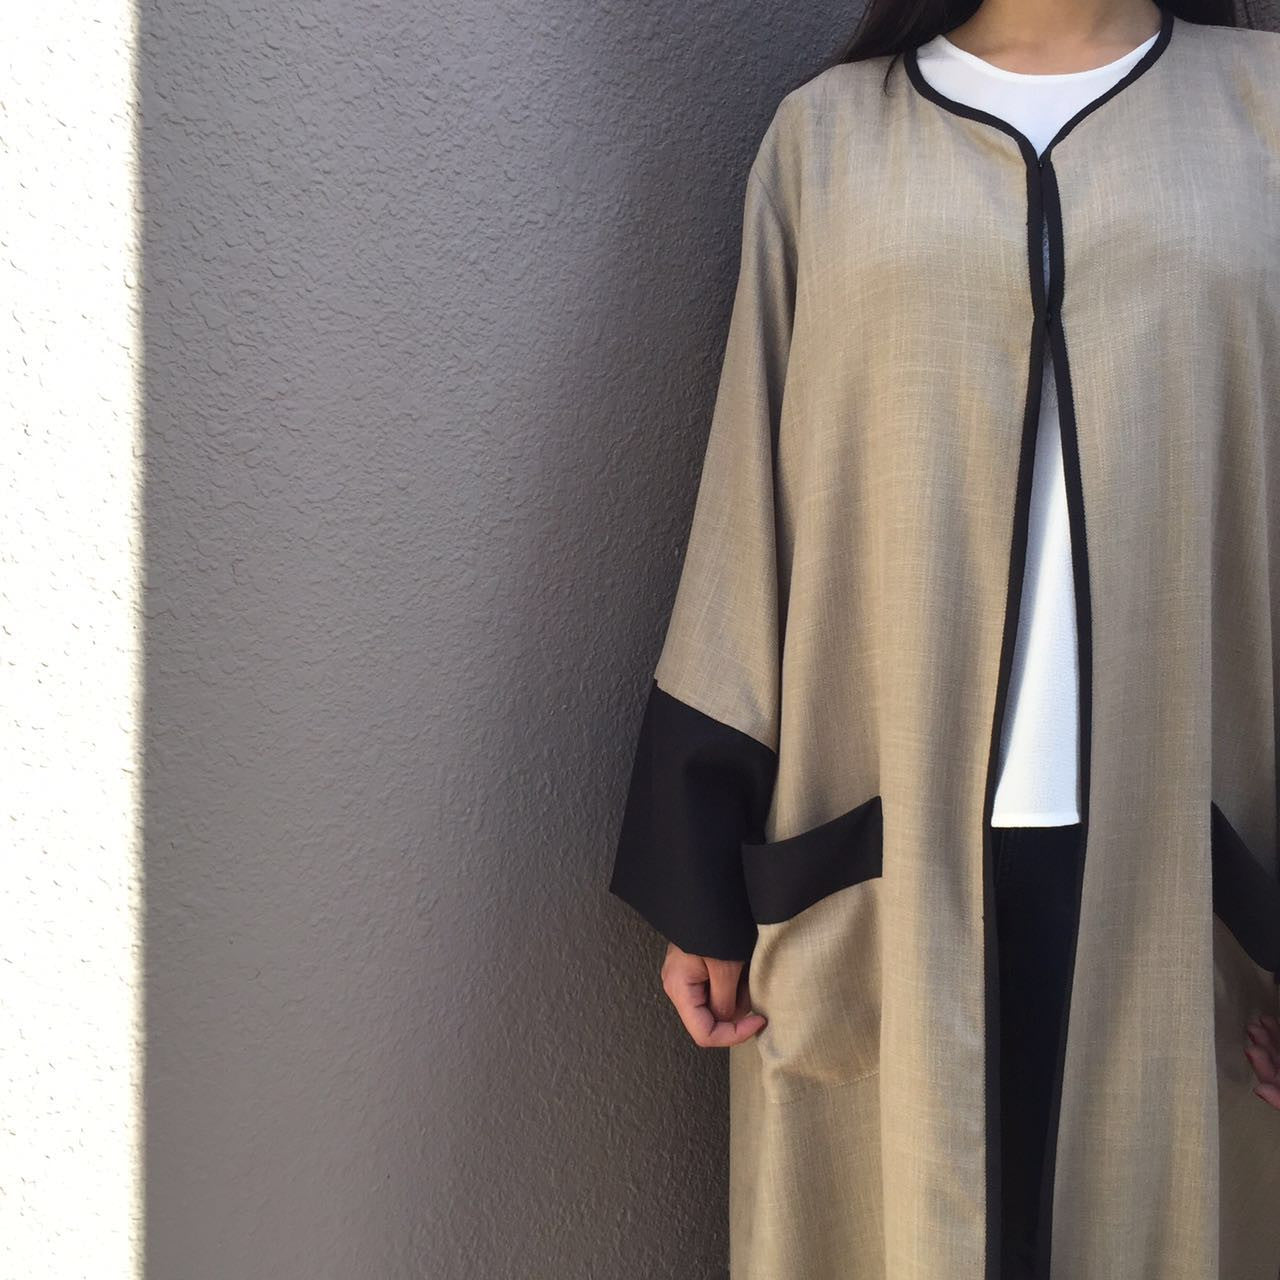 Linen Robe in colour block with pocket detailing